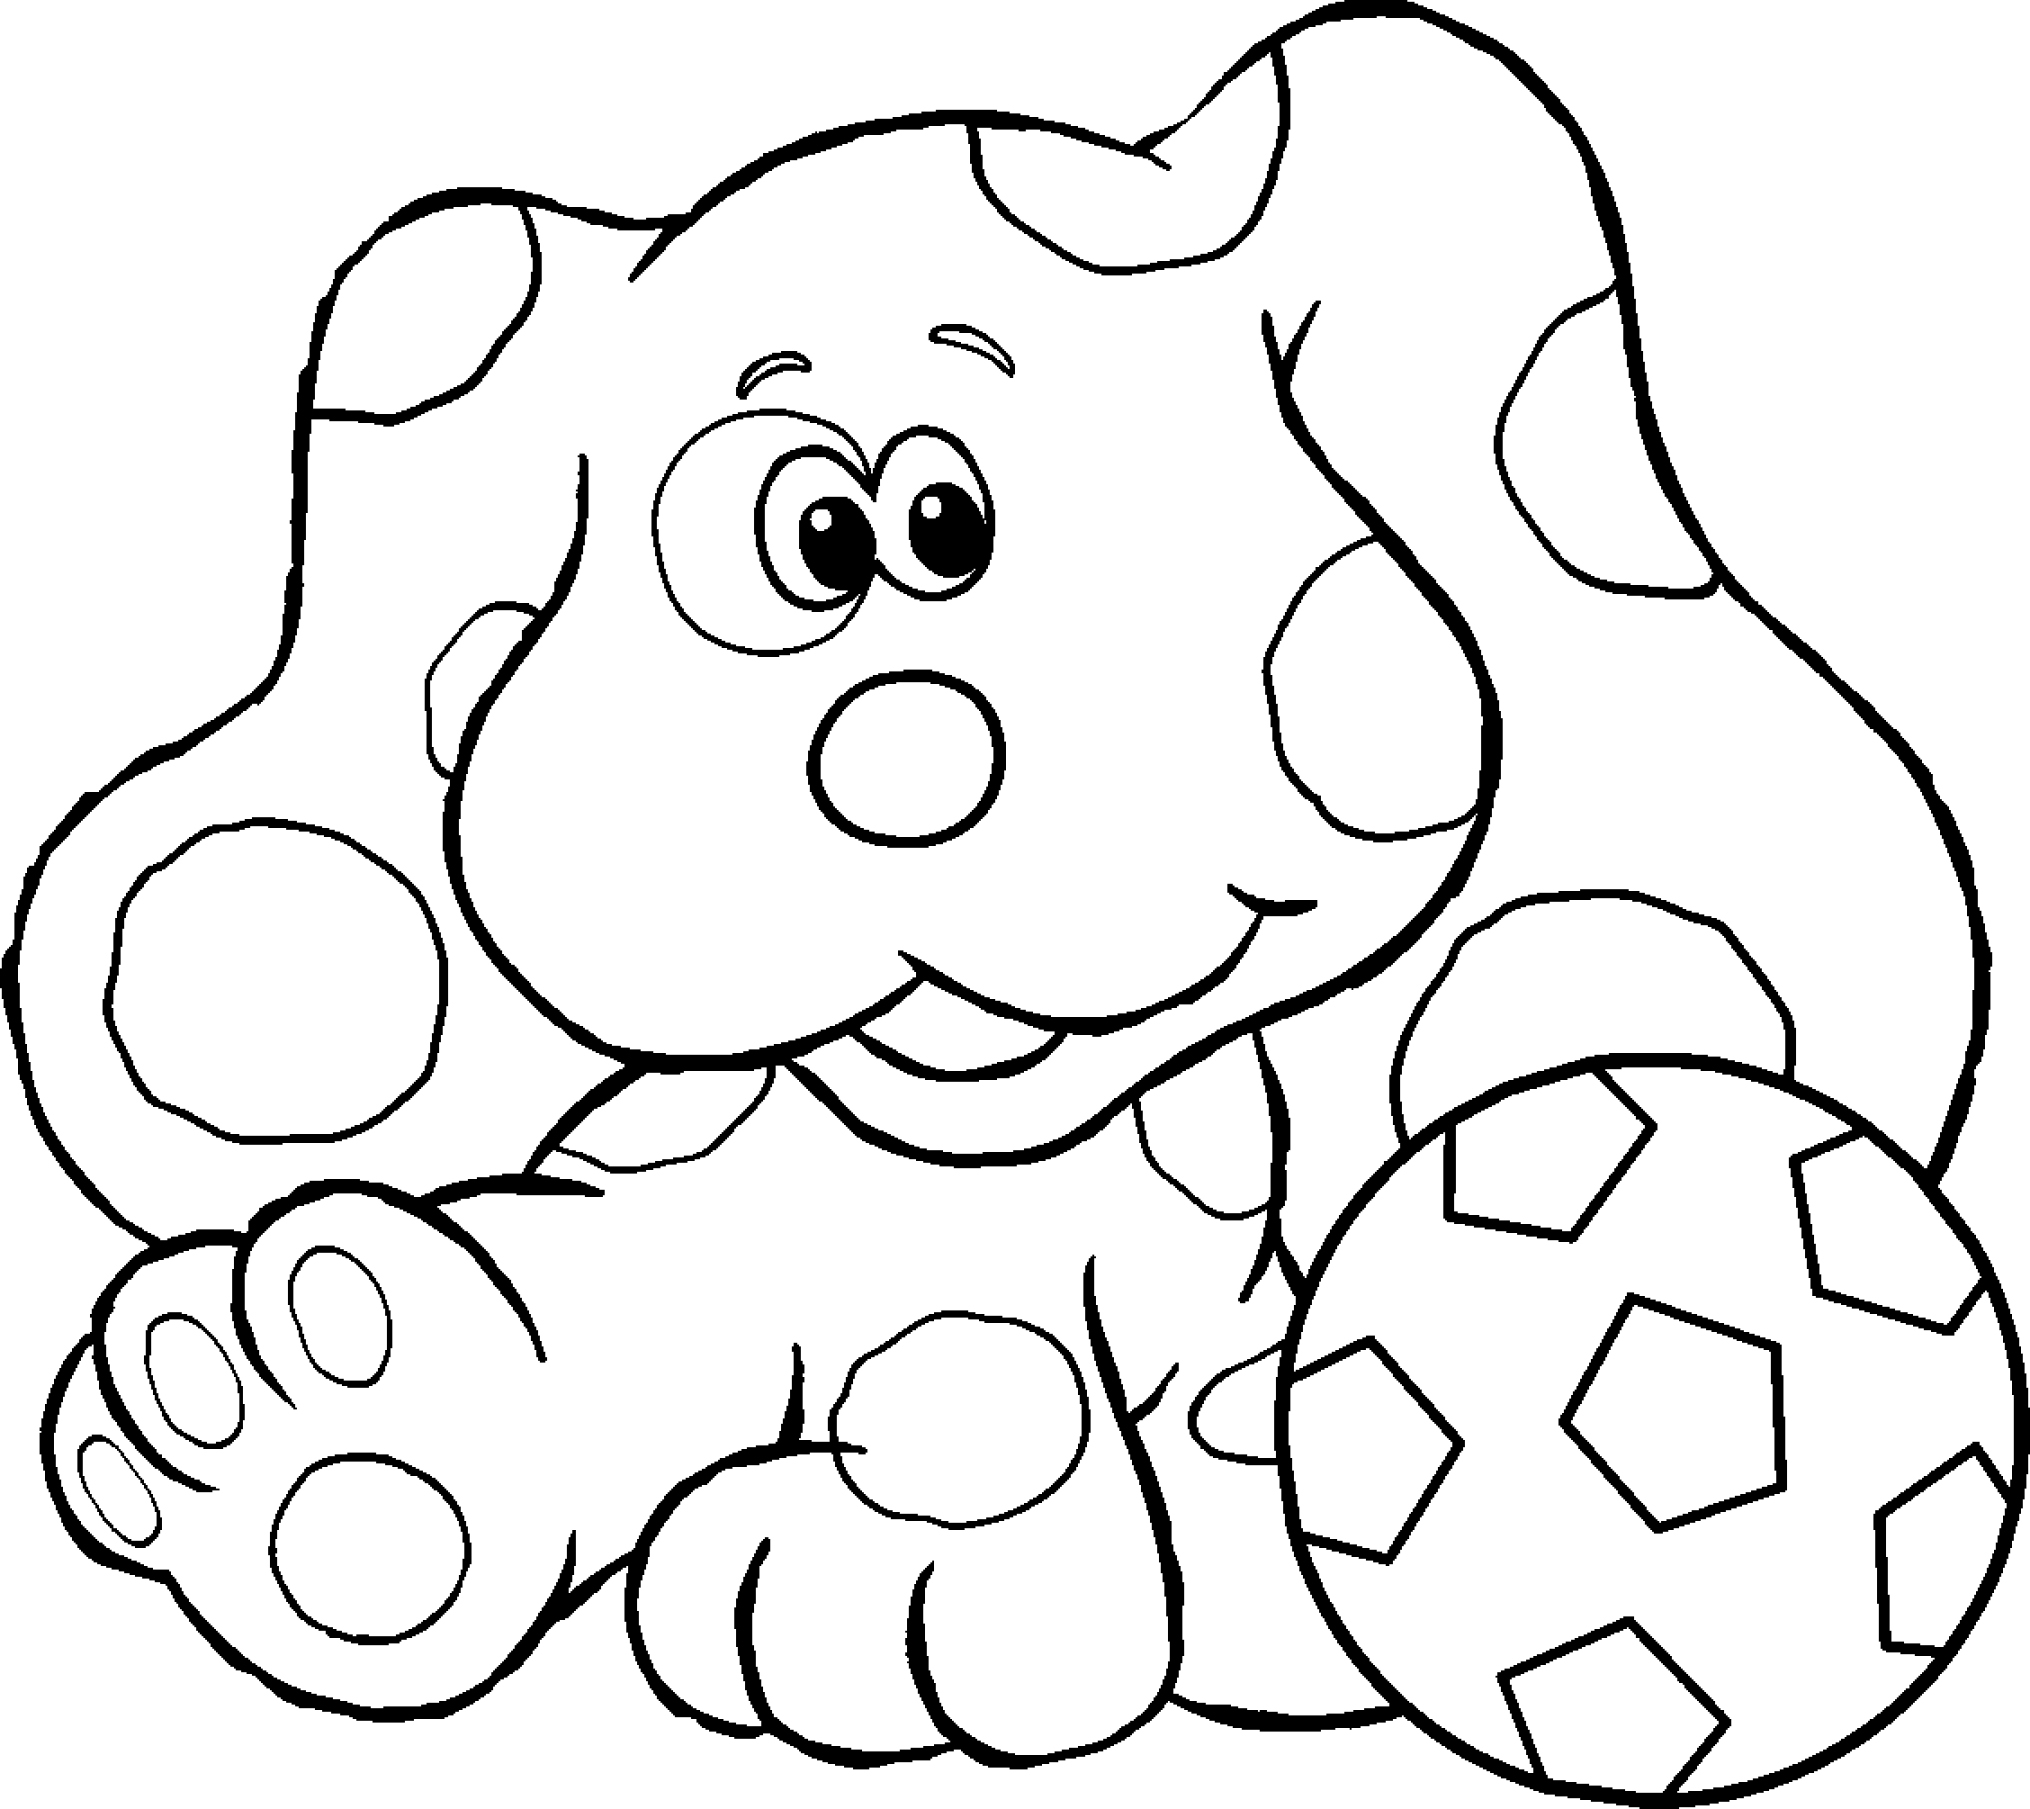 Blues Clues Paw Print Coloring Page ClipArt Best